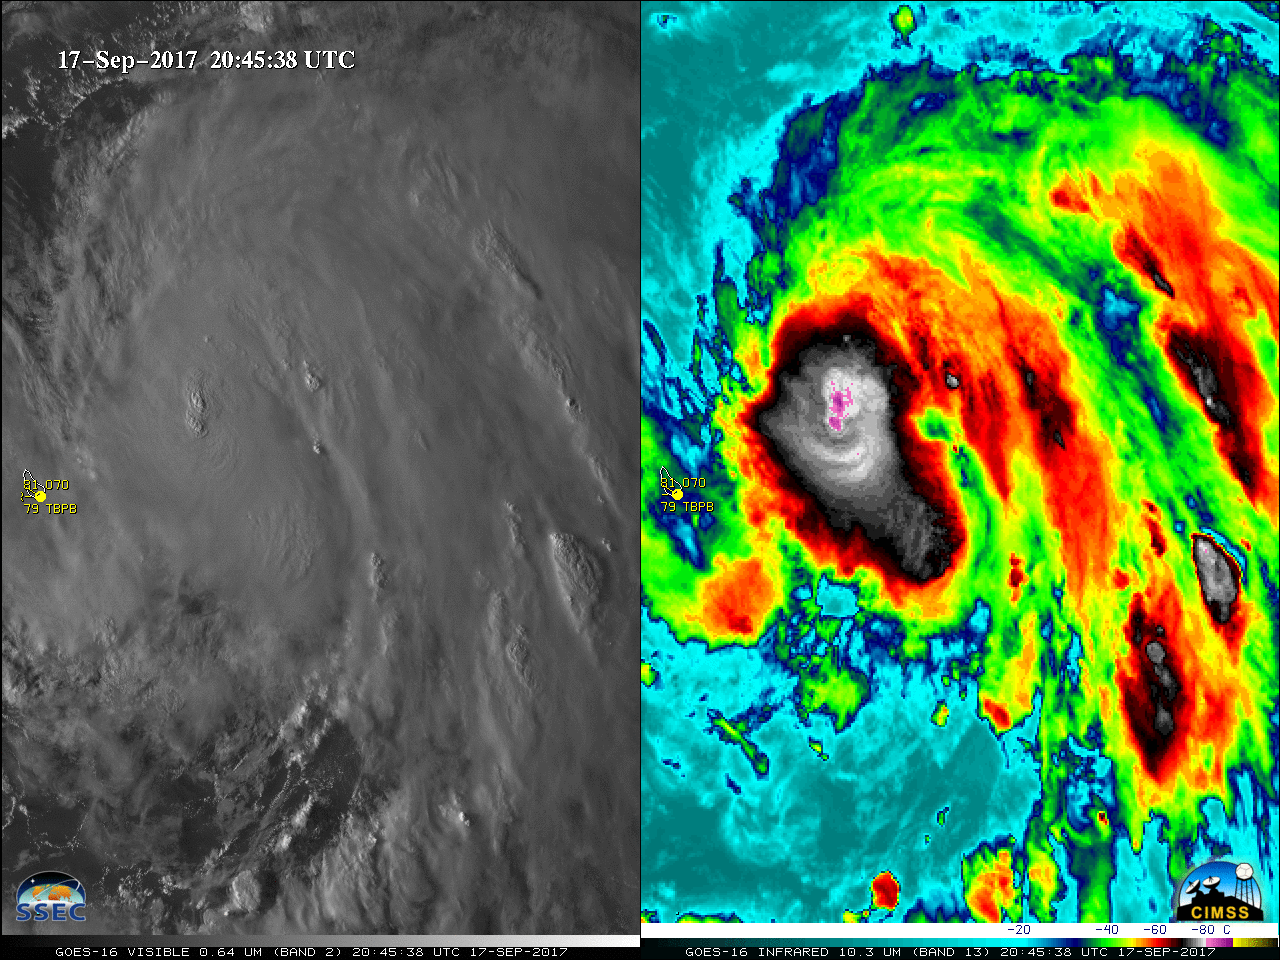 GOES-16 Visible (0.64 µm, left) and Infrared Window (10.3 µm, right) images [click to animate]